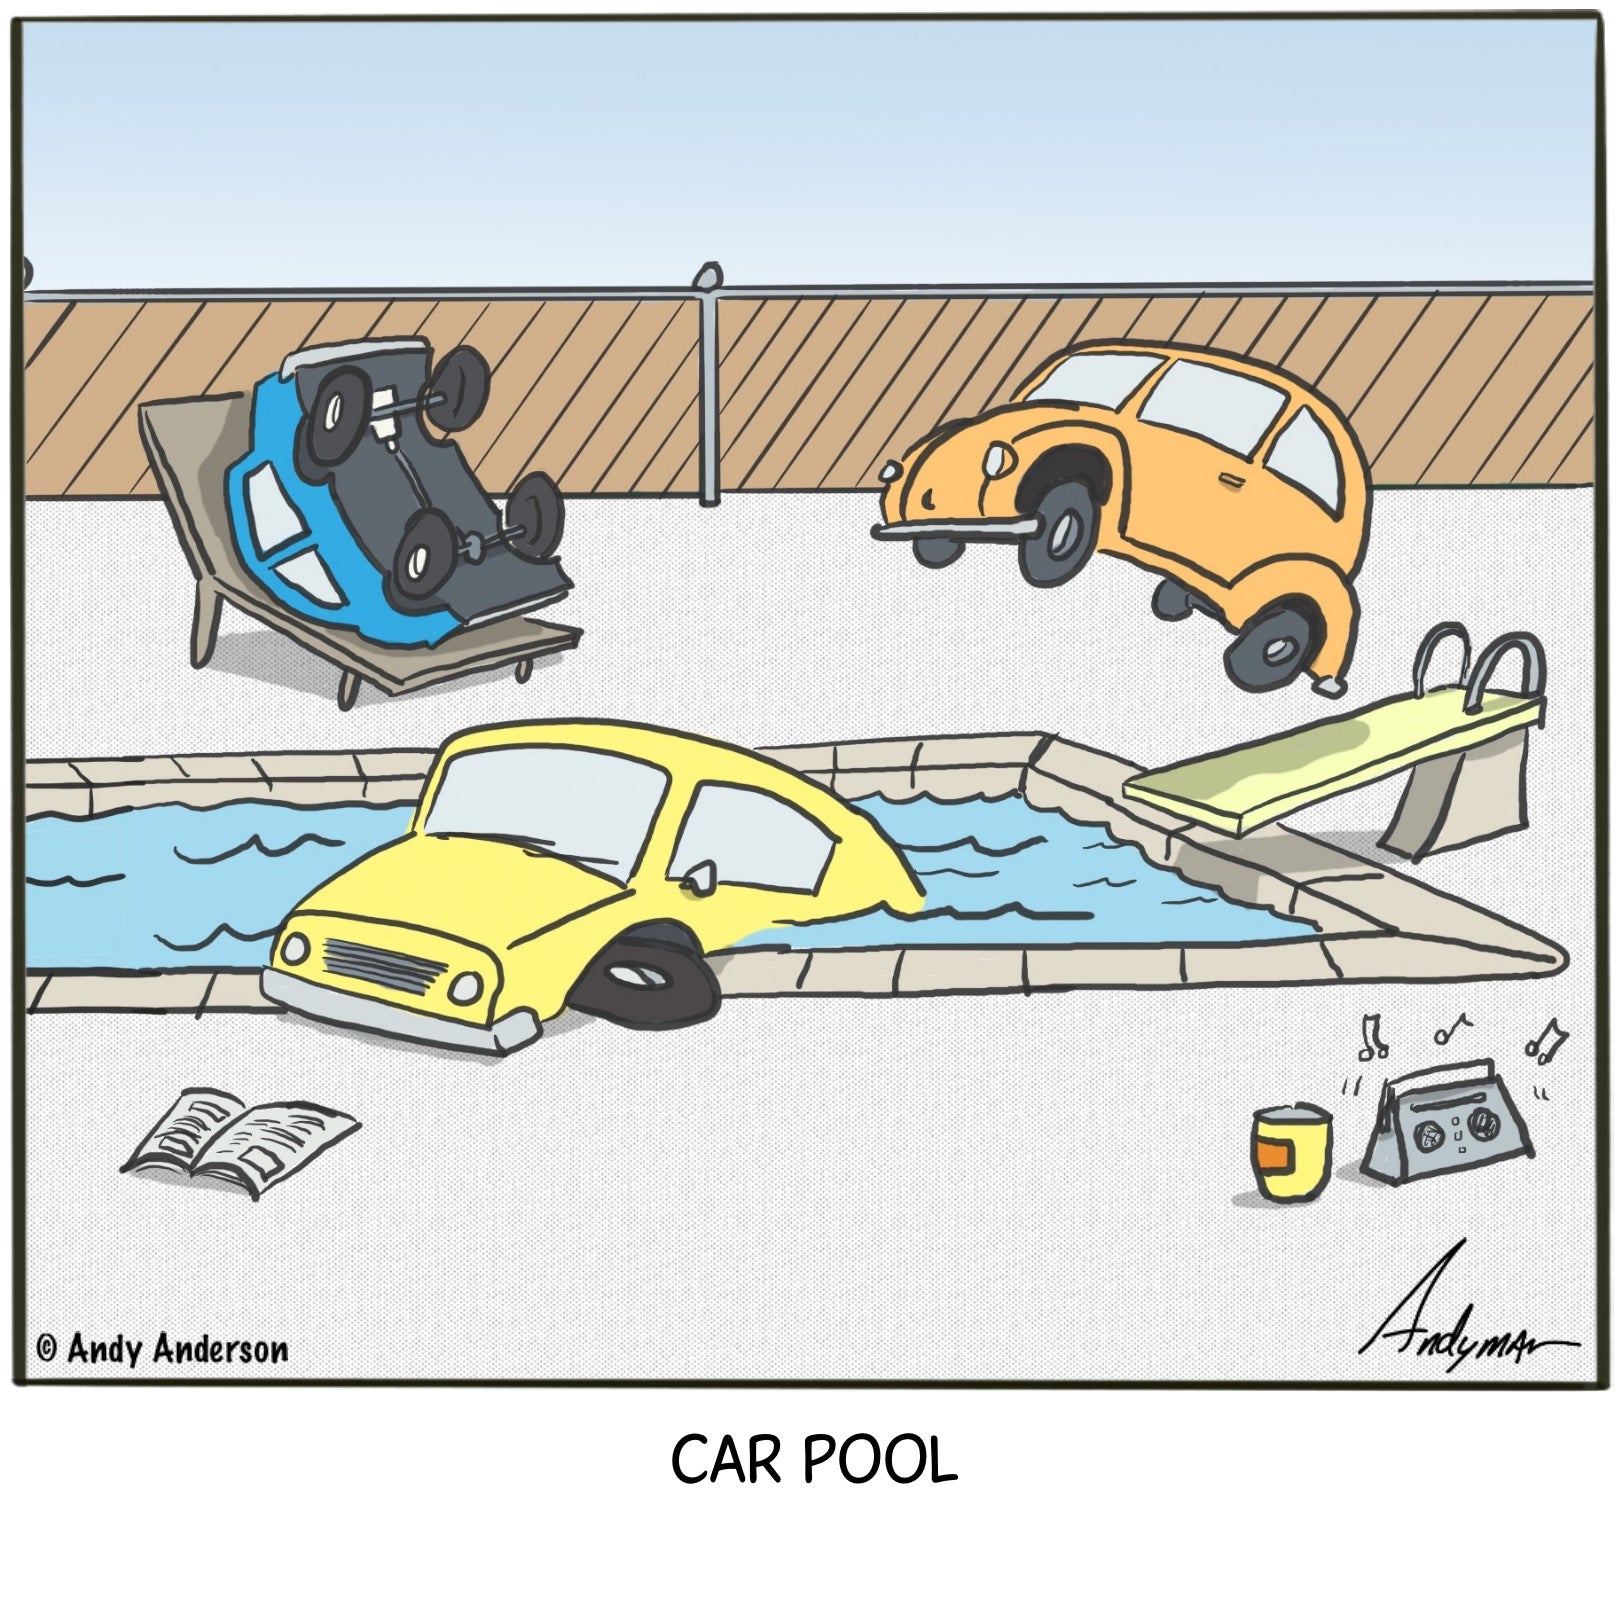 Car pool cartoon by Andy Anderson